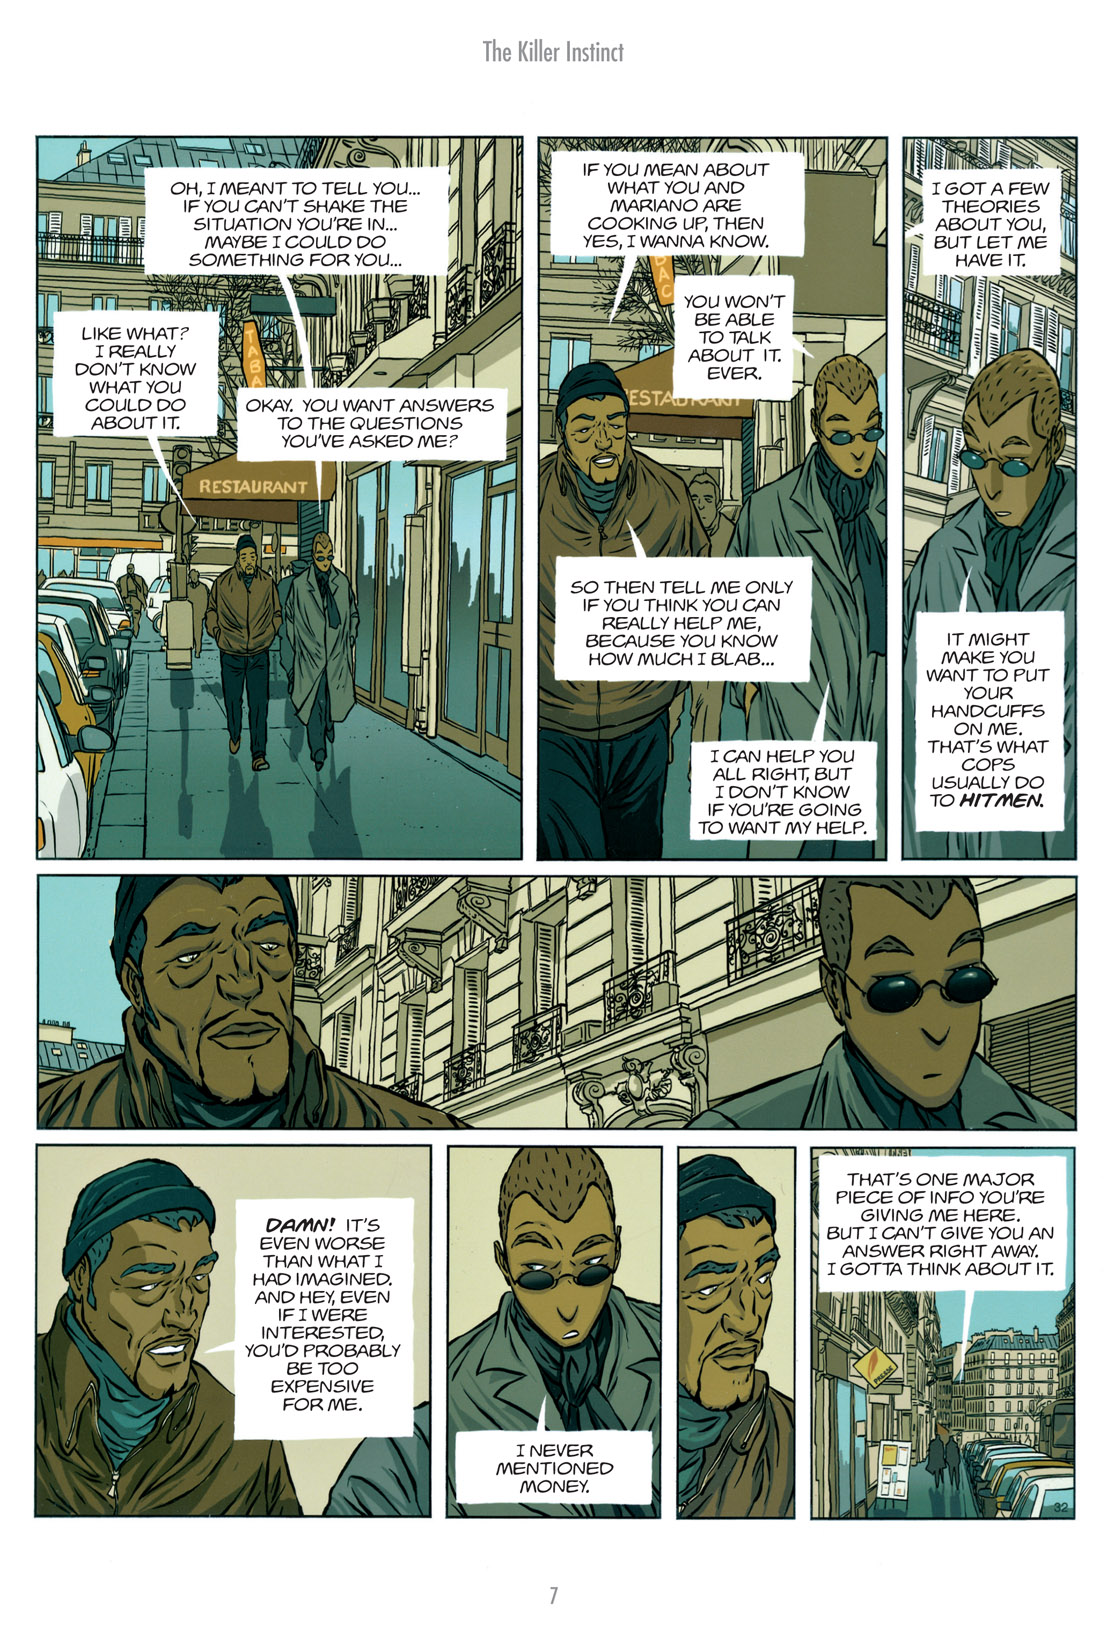 Read online The Killer comic -  Issue # TPB 2 - 162